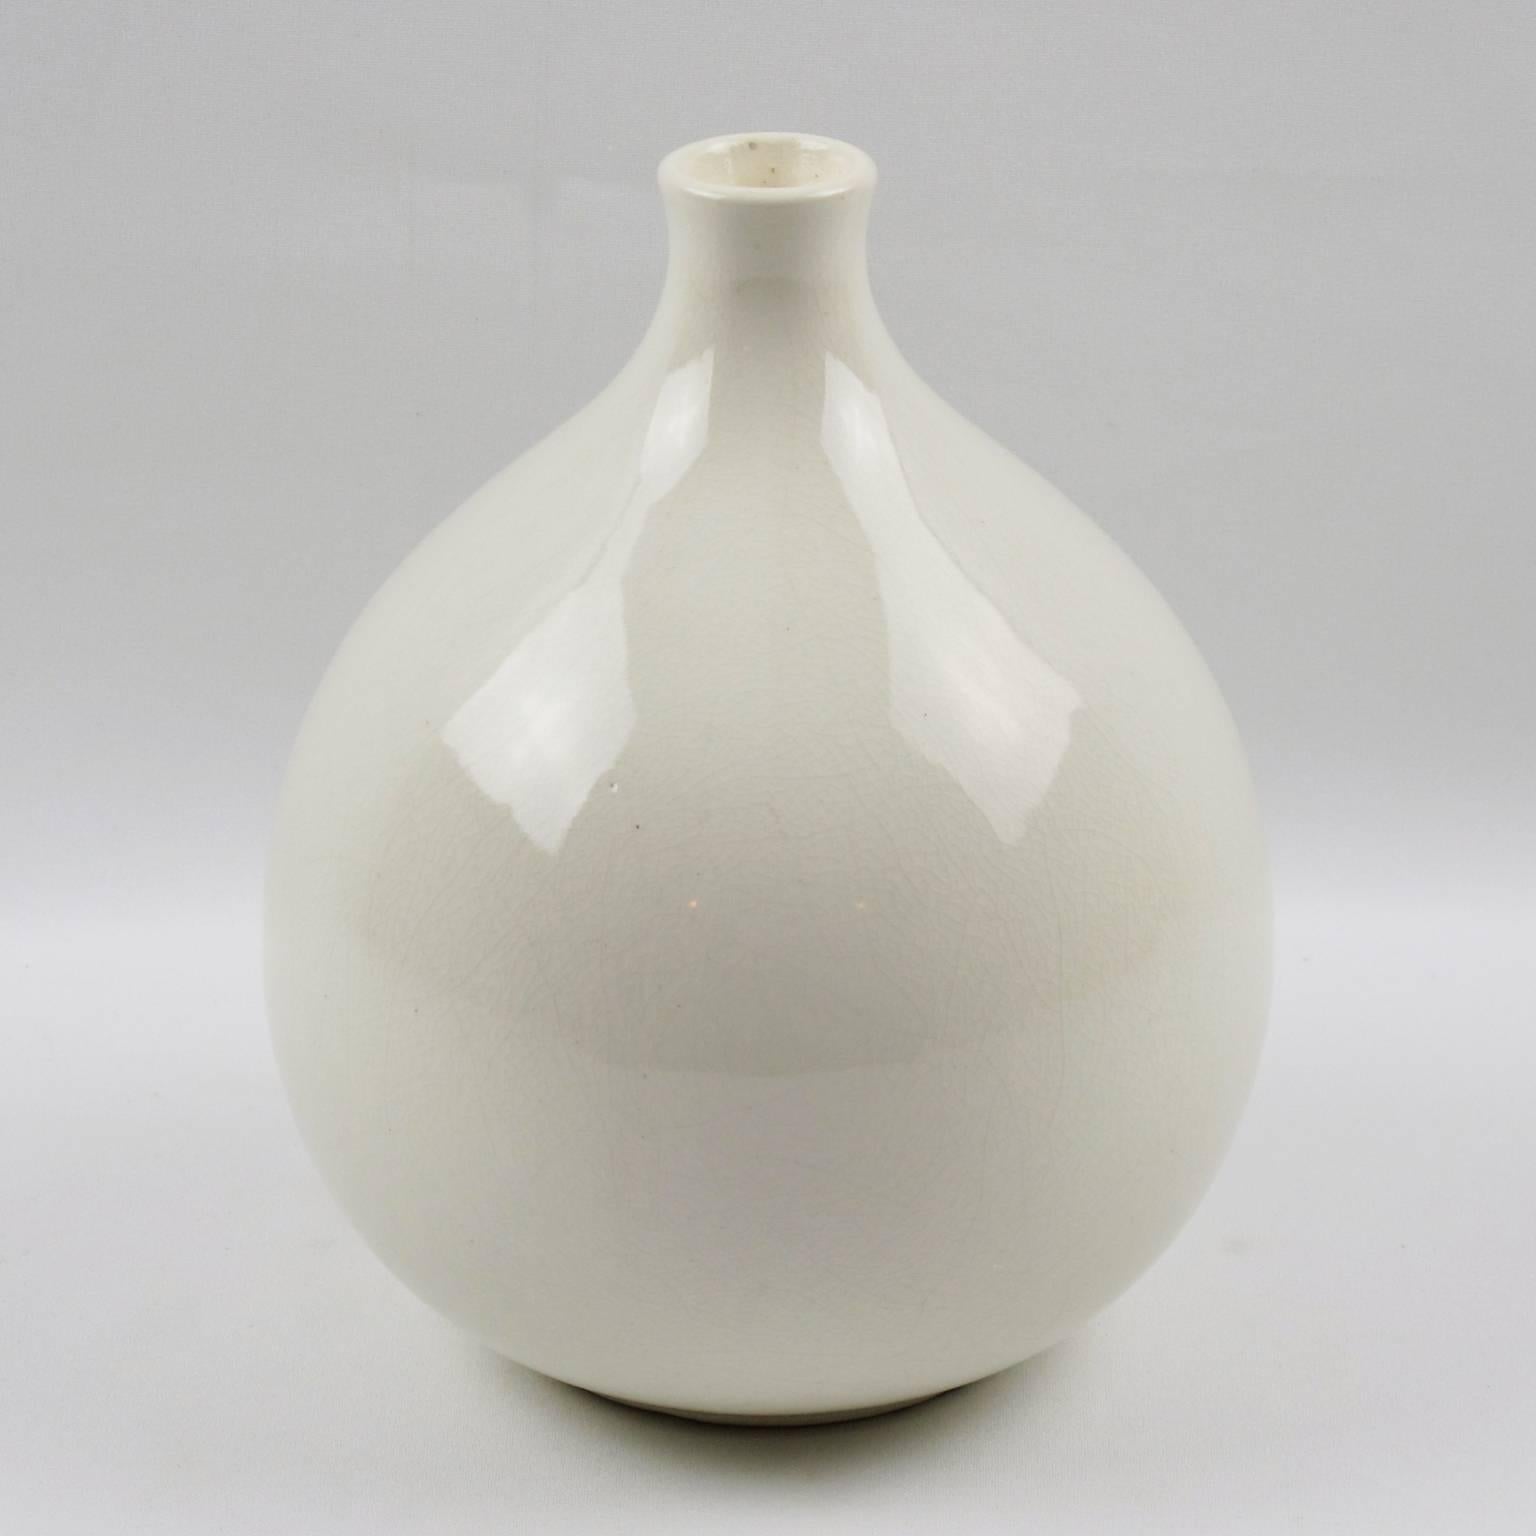 Elegant Art Deco vase by Saint Clement, France. French ceramic vase with white crackle glaze finish. Features a large puffy round shape with tiny narrow tube opening and Minimalist shape. Signed underside: 'St Clement - Made in France'.
The crackle